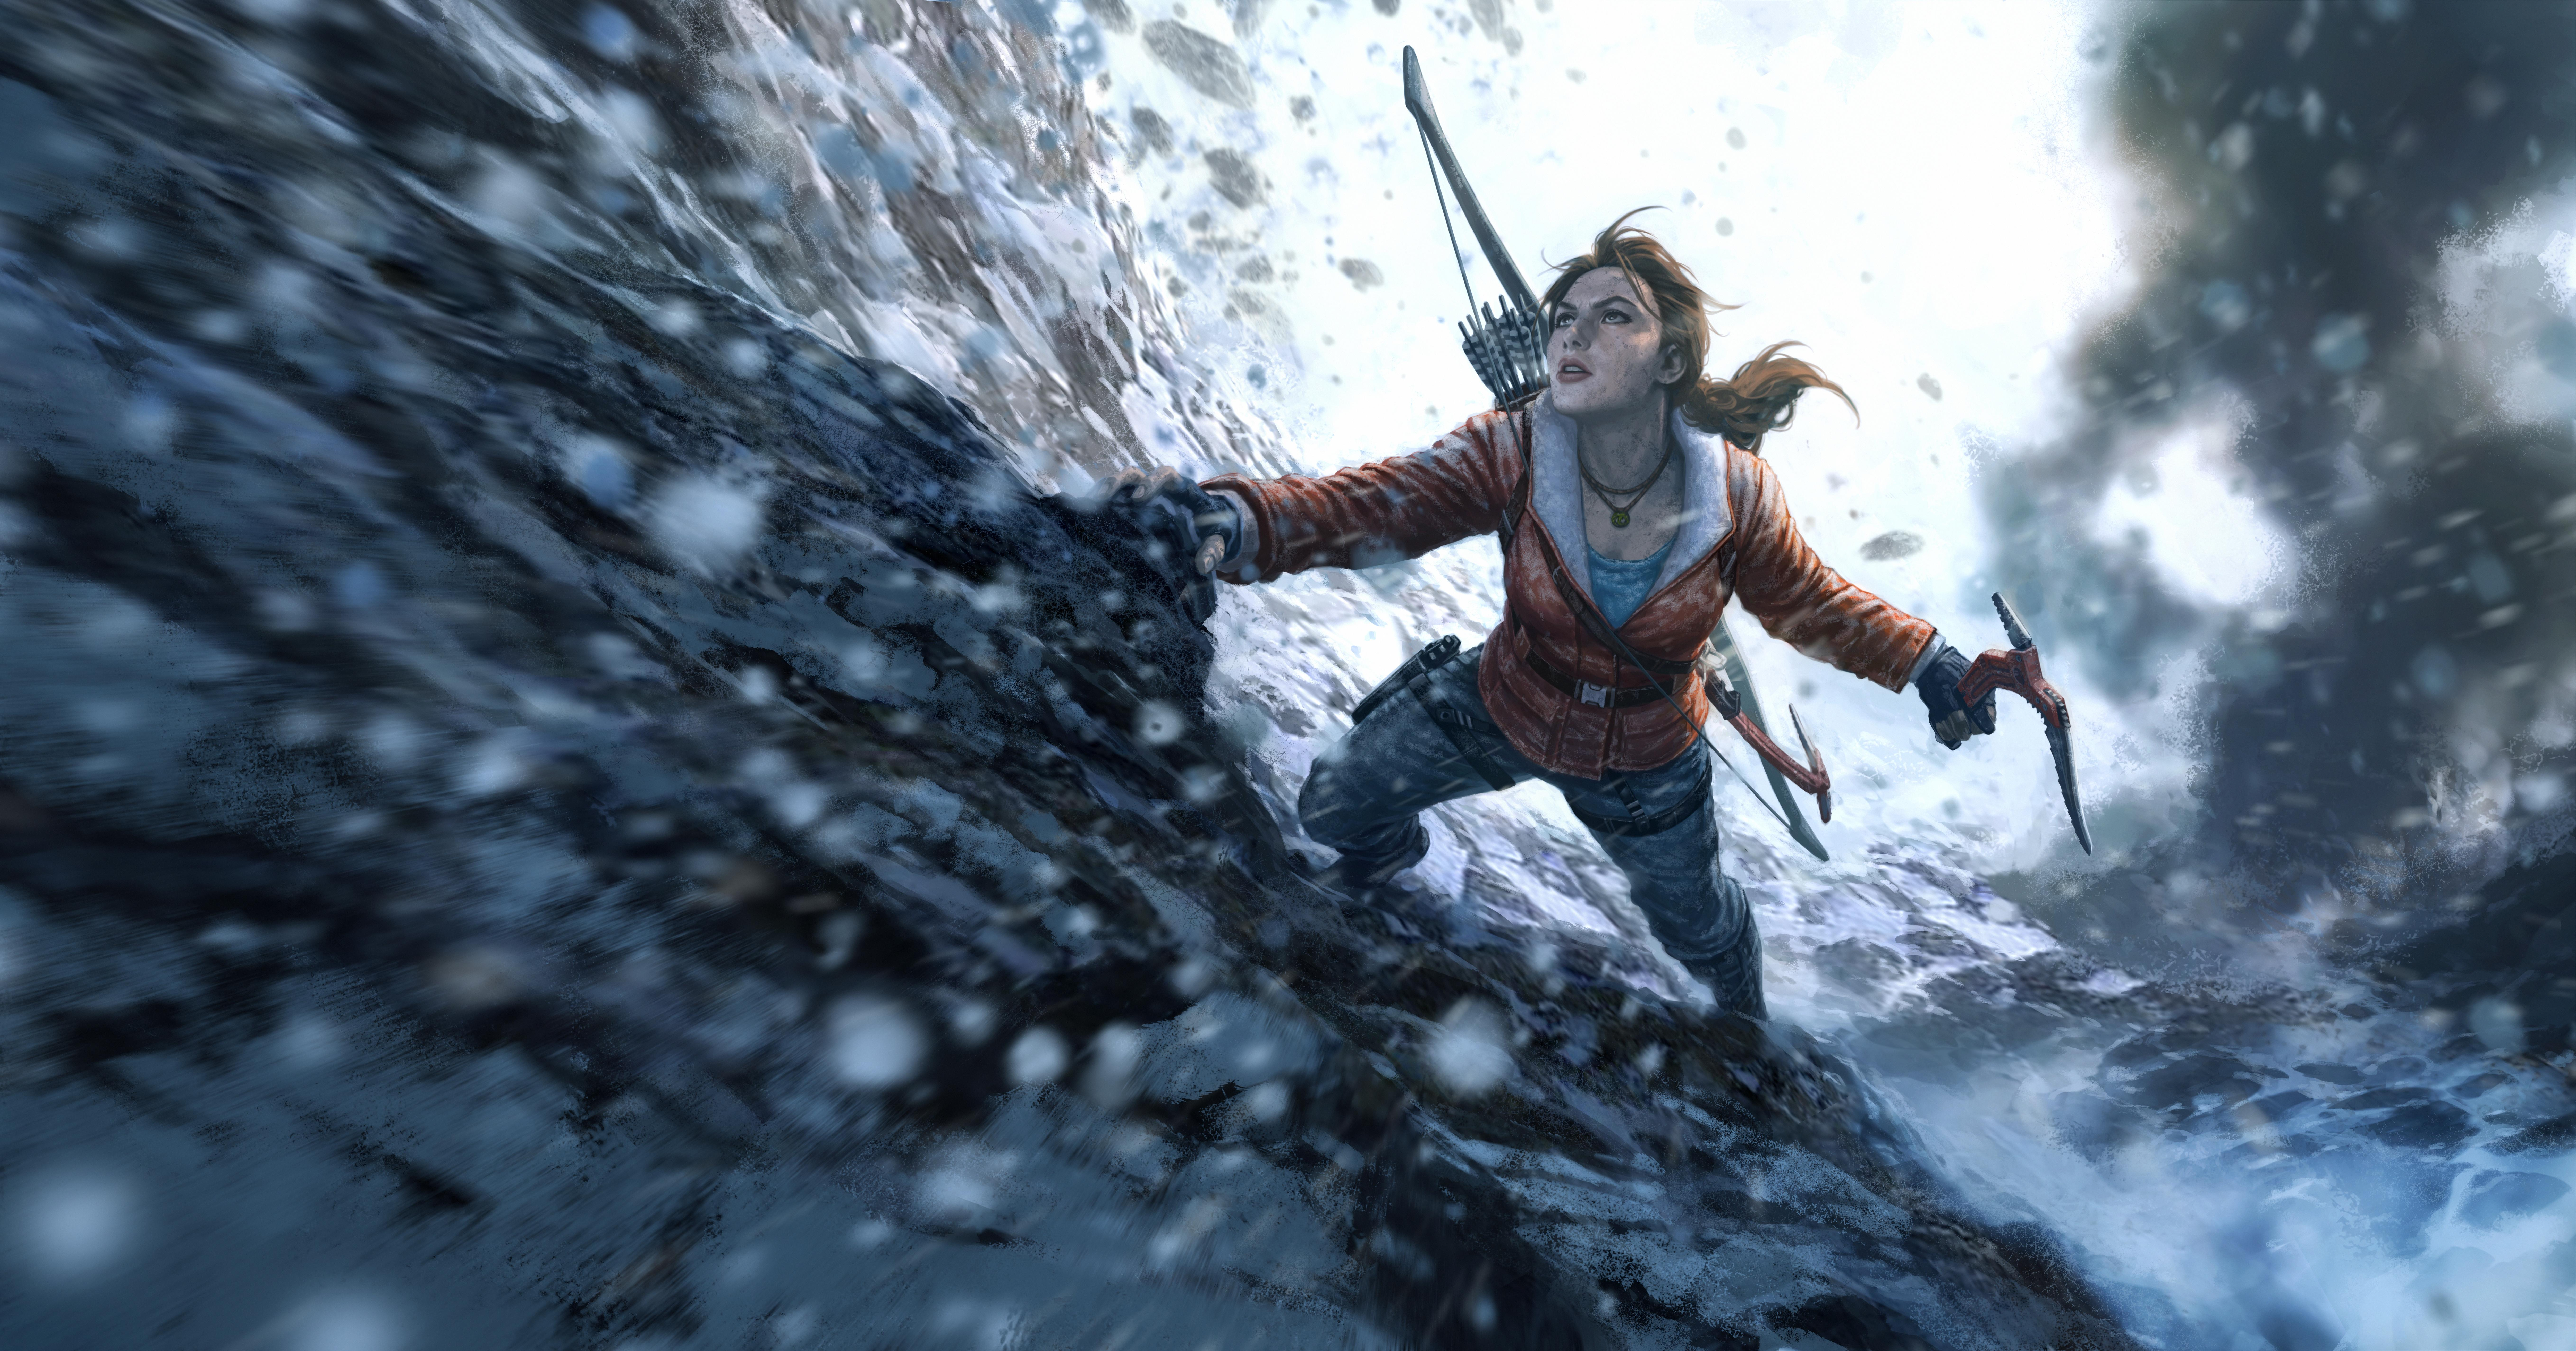 Tomb Raider writer wants fewer ‘father issues’ in next game